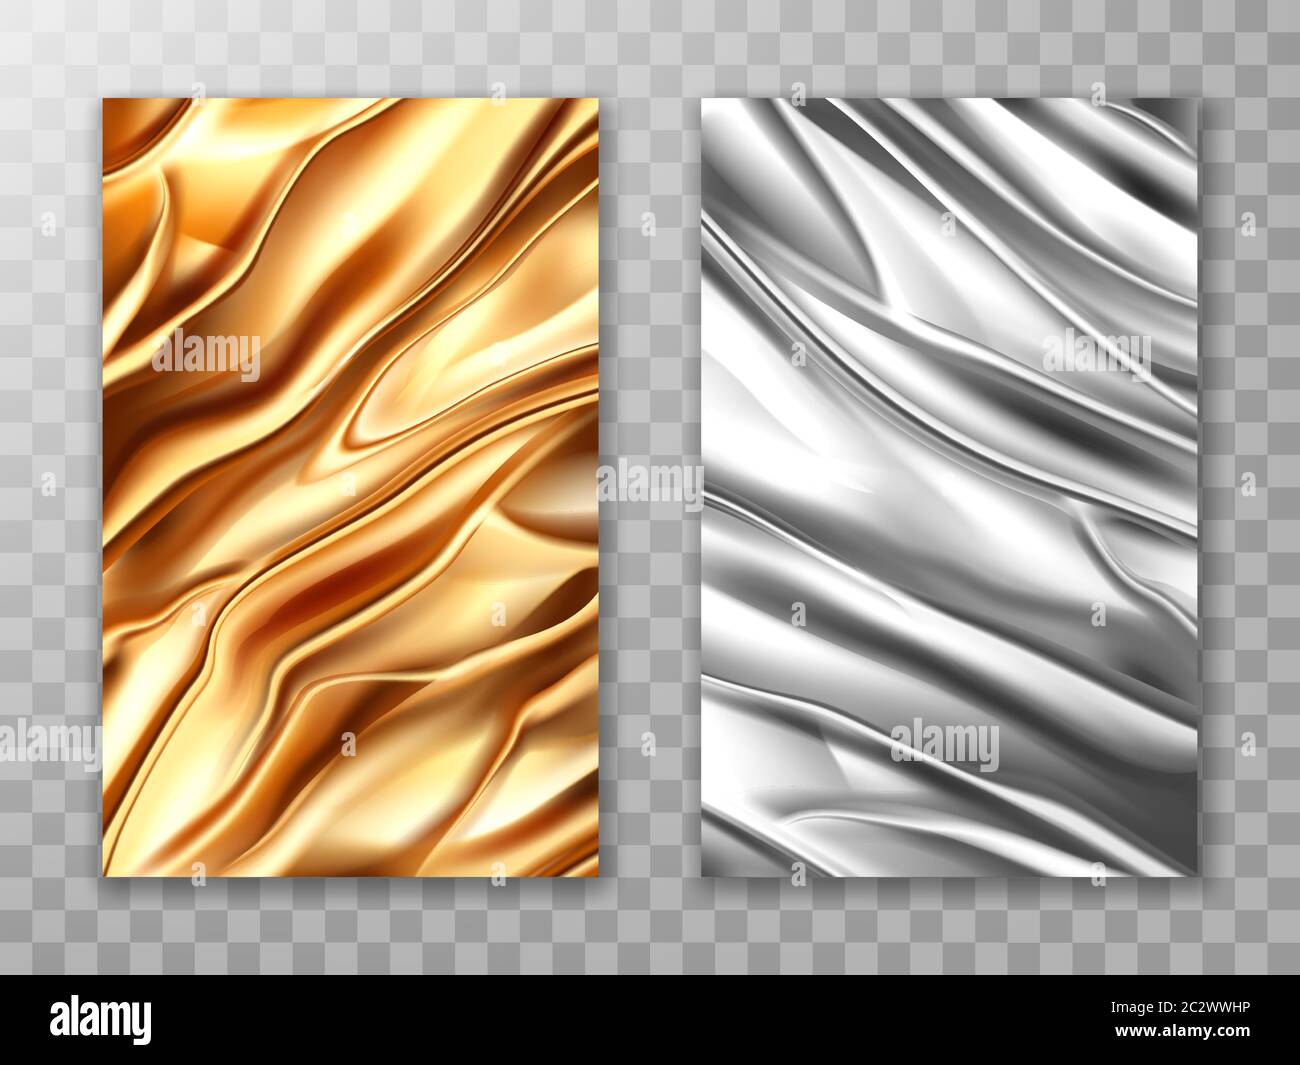 https://c8.alamy.com/comp/2C2WWHP/foil-golden-and-silver-crumpled-metal-texture-background-aluminum-gold-and-steel-colored-folded-wrapping-paper-sheets-wrinkled-fabric-or-plastic-sh-2C2WWHP.jpg